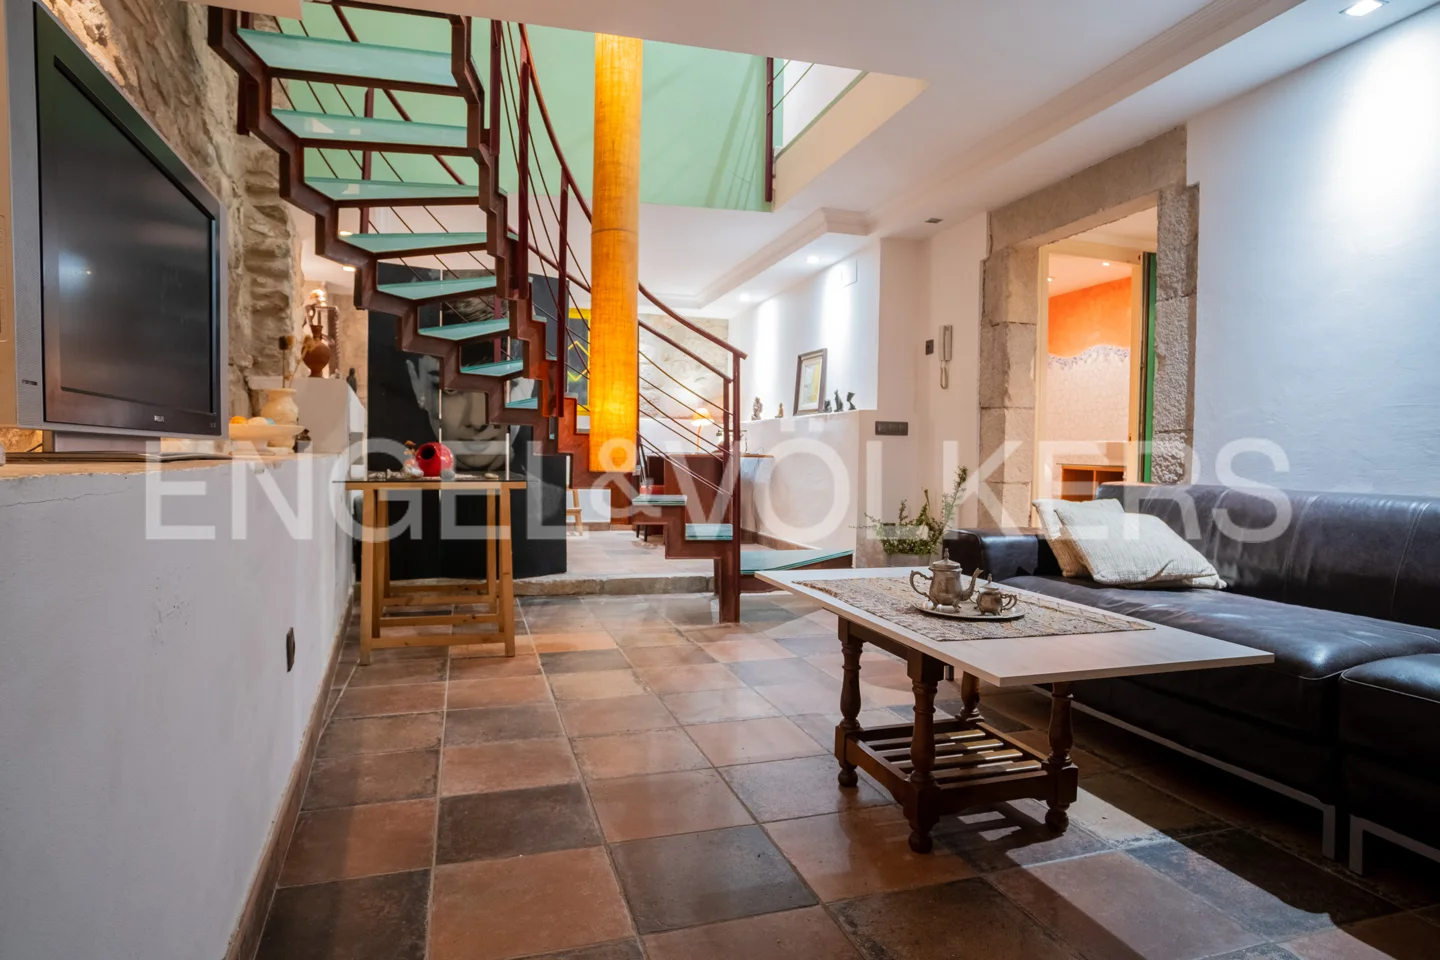 EXCLUSIVE DUPLEX IN THE HEART OF THE BARRI VELL